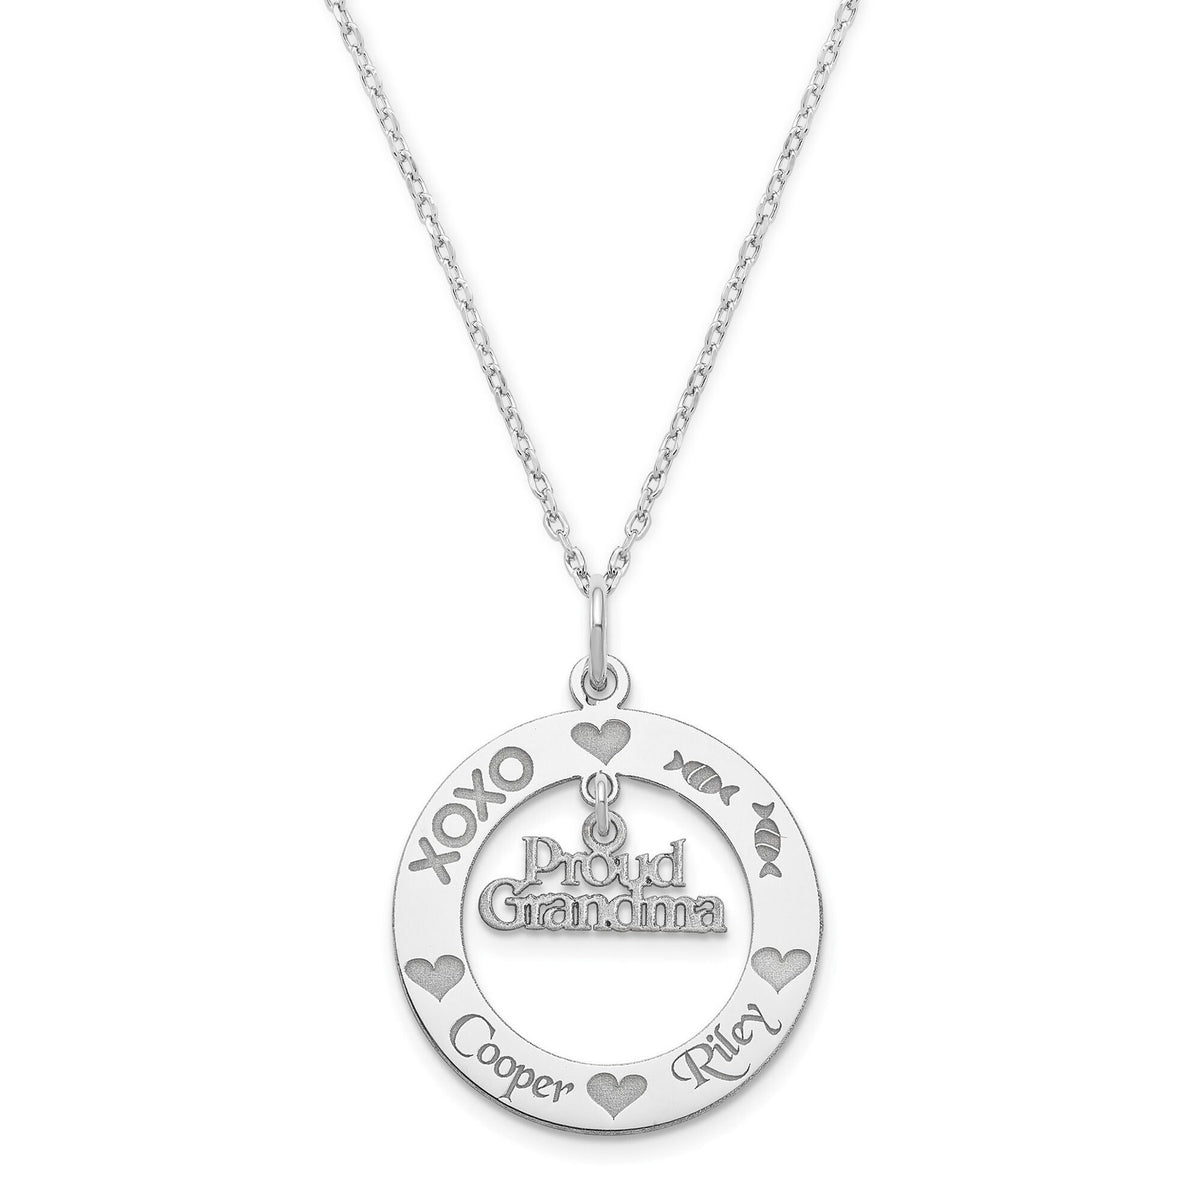 Personalized Proud Grandmother Pendant w/ 2 Names Necklace Sterling Silver Laser Engraved Gift For Grandparents Grandma